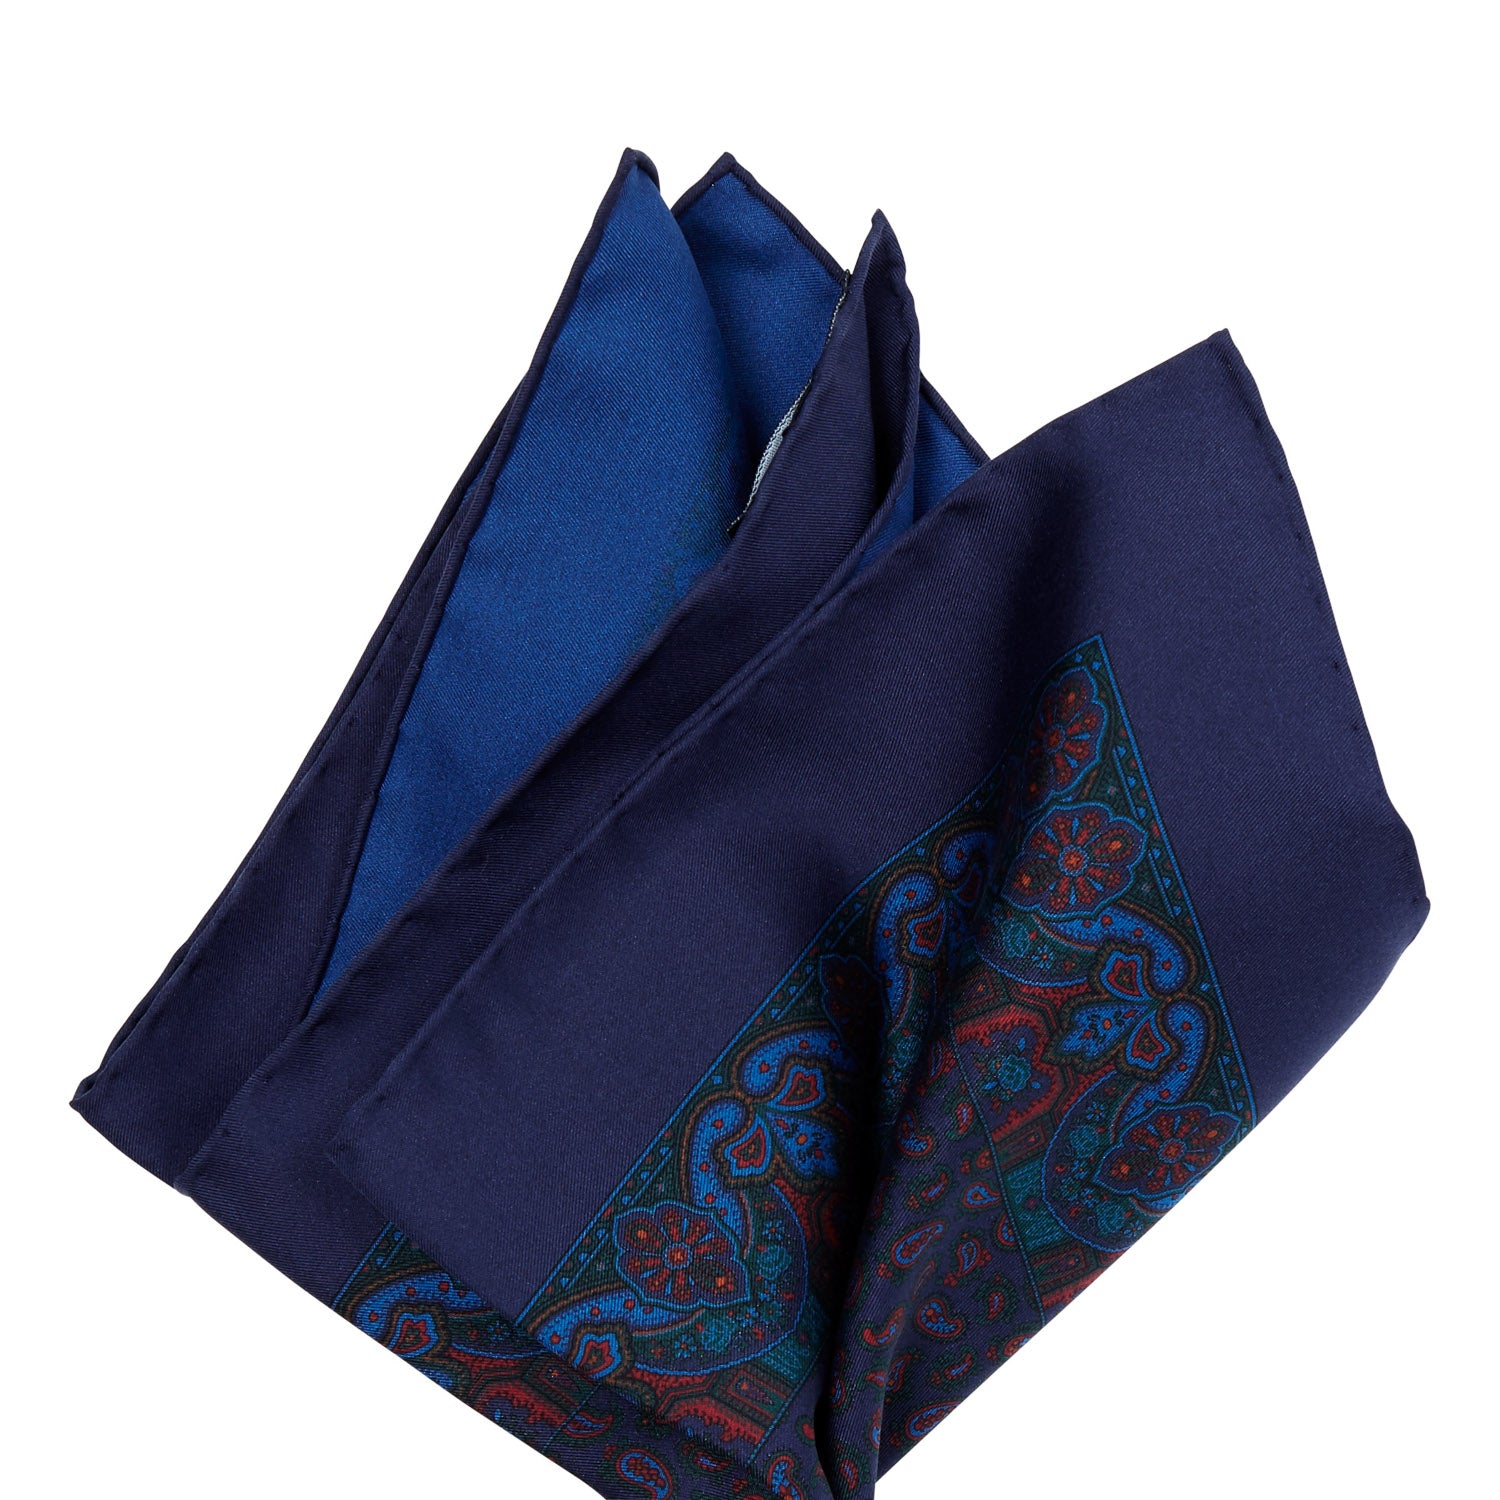 A Sovereign Grade Ancient Madder Midnight Paisley Pocket Square with hand-rolled edges in a blue and red paisley design from KirbyAllison.com.